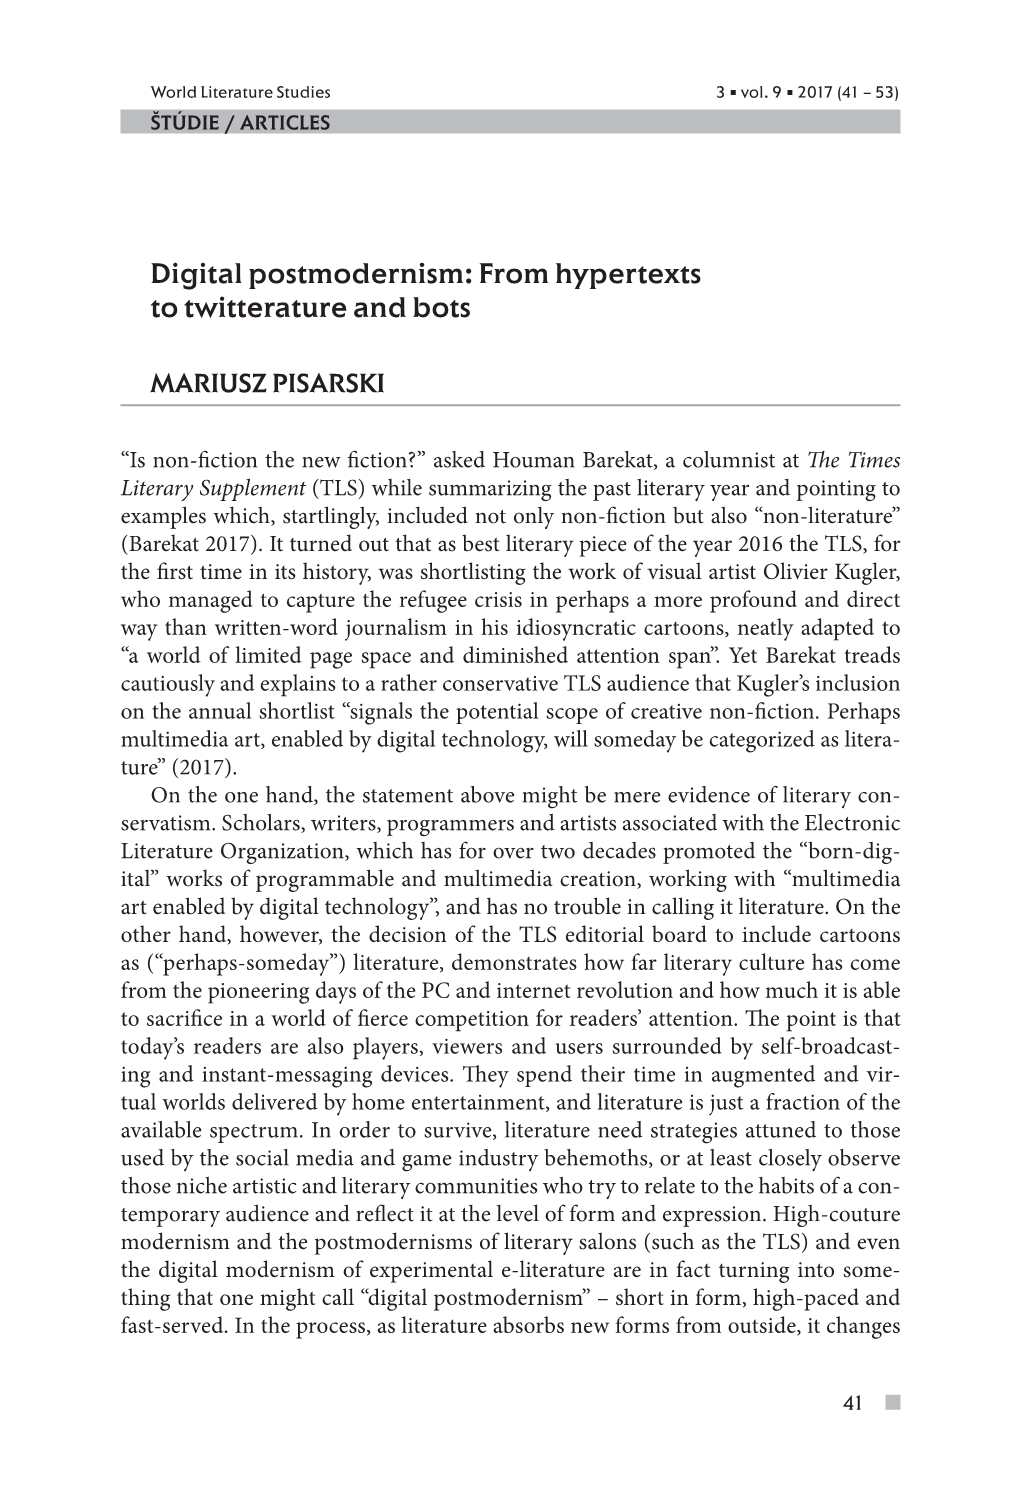 Digital Postmodernism: from Hypertexts to Twitterature and Bots